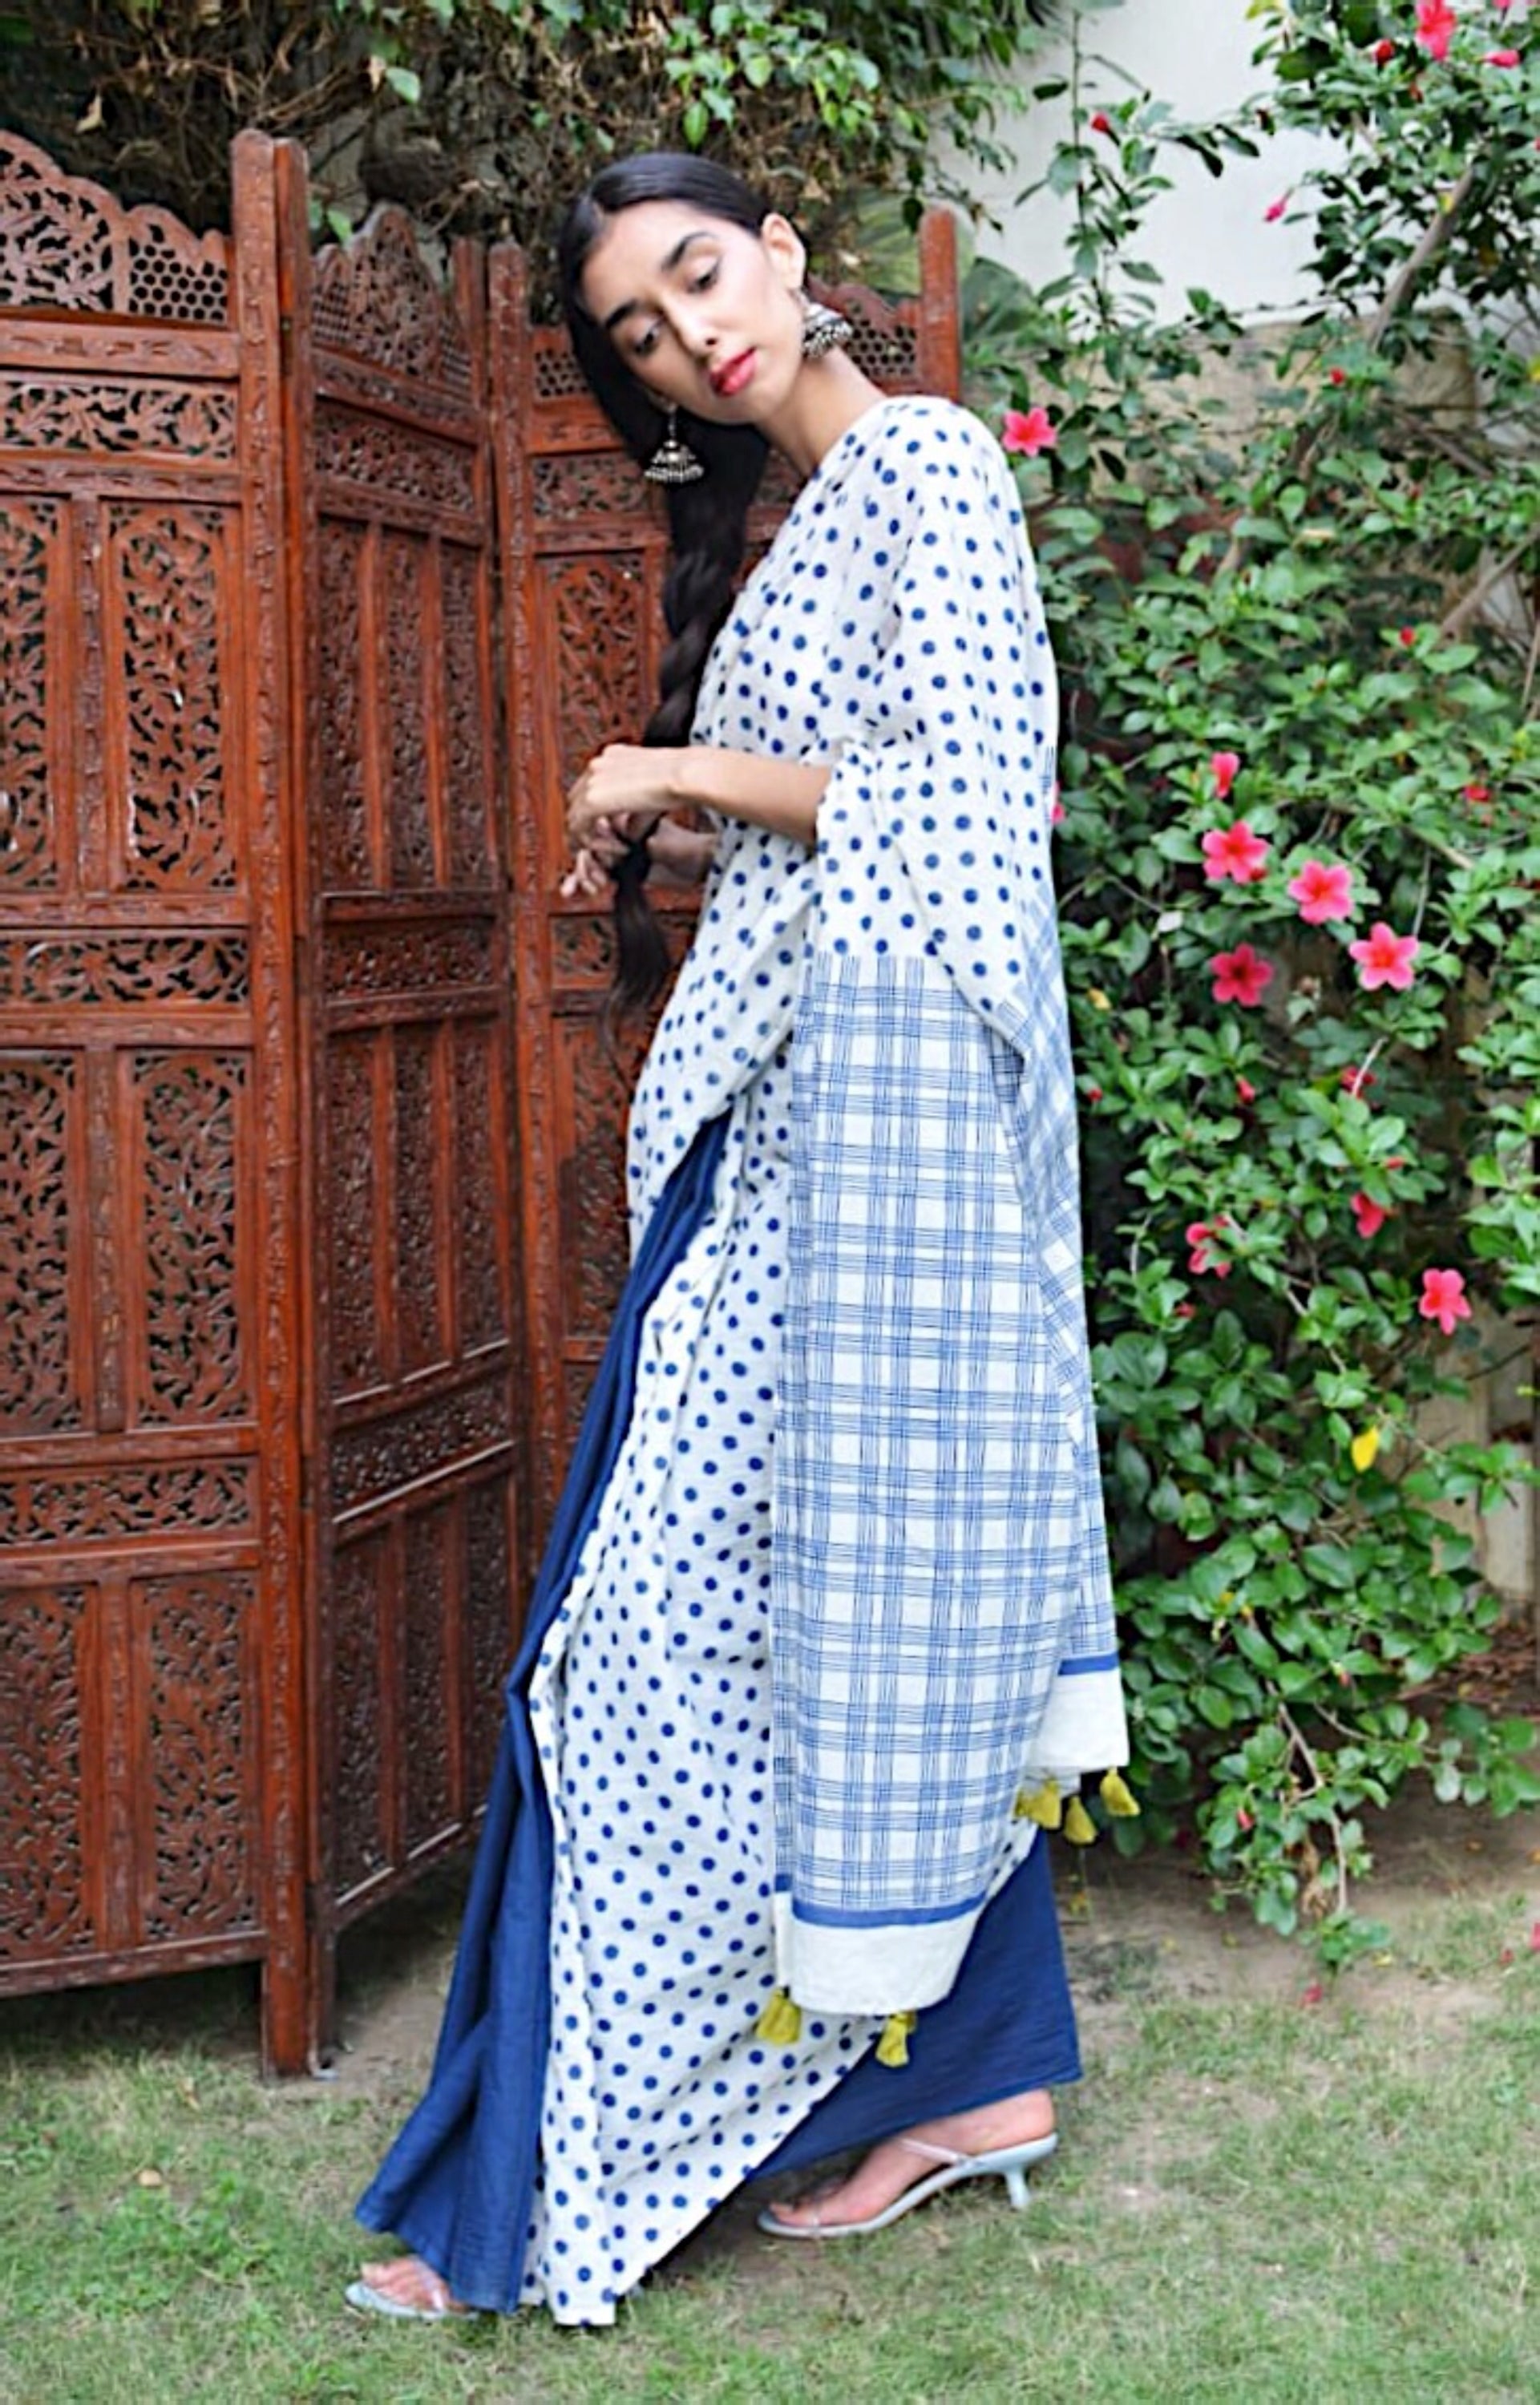 Hand Block Printed cotton mulmul blue polka dot saree for festivities, office, and daily. All day comfort and style